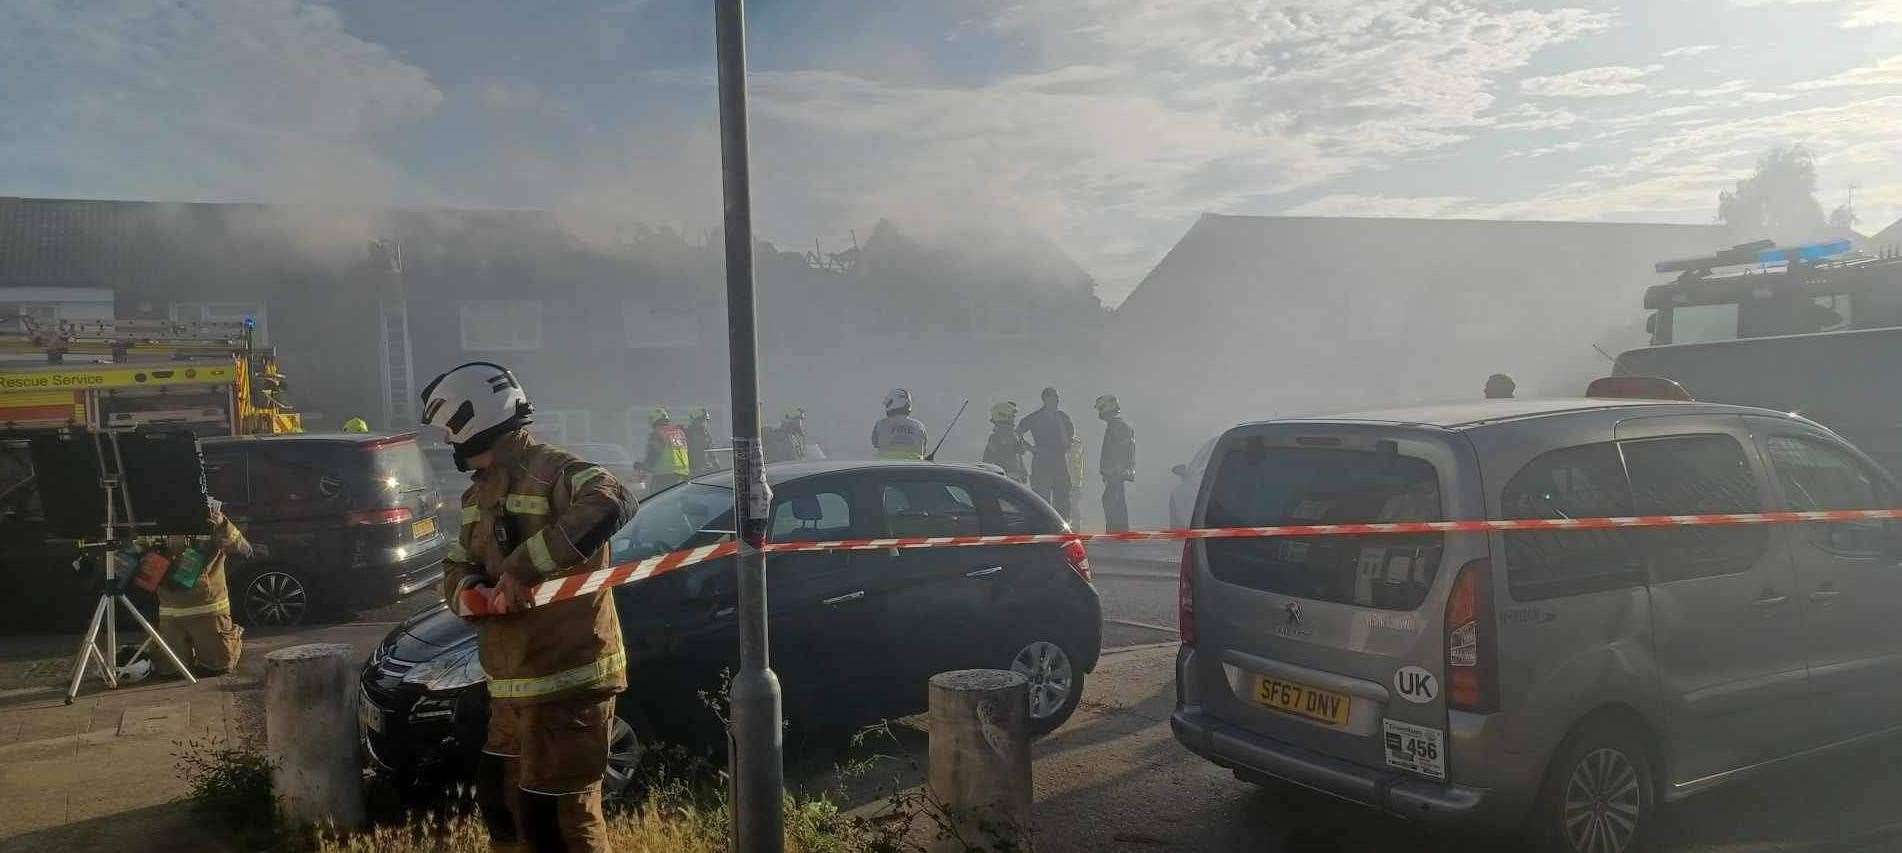 Firefighters at the scene in Northfleet. Picture: Courtney Kedge